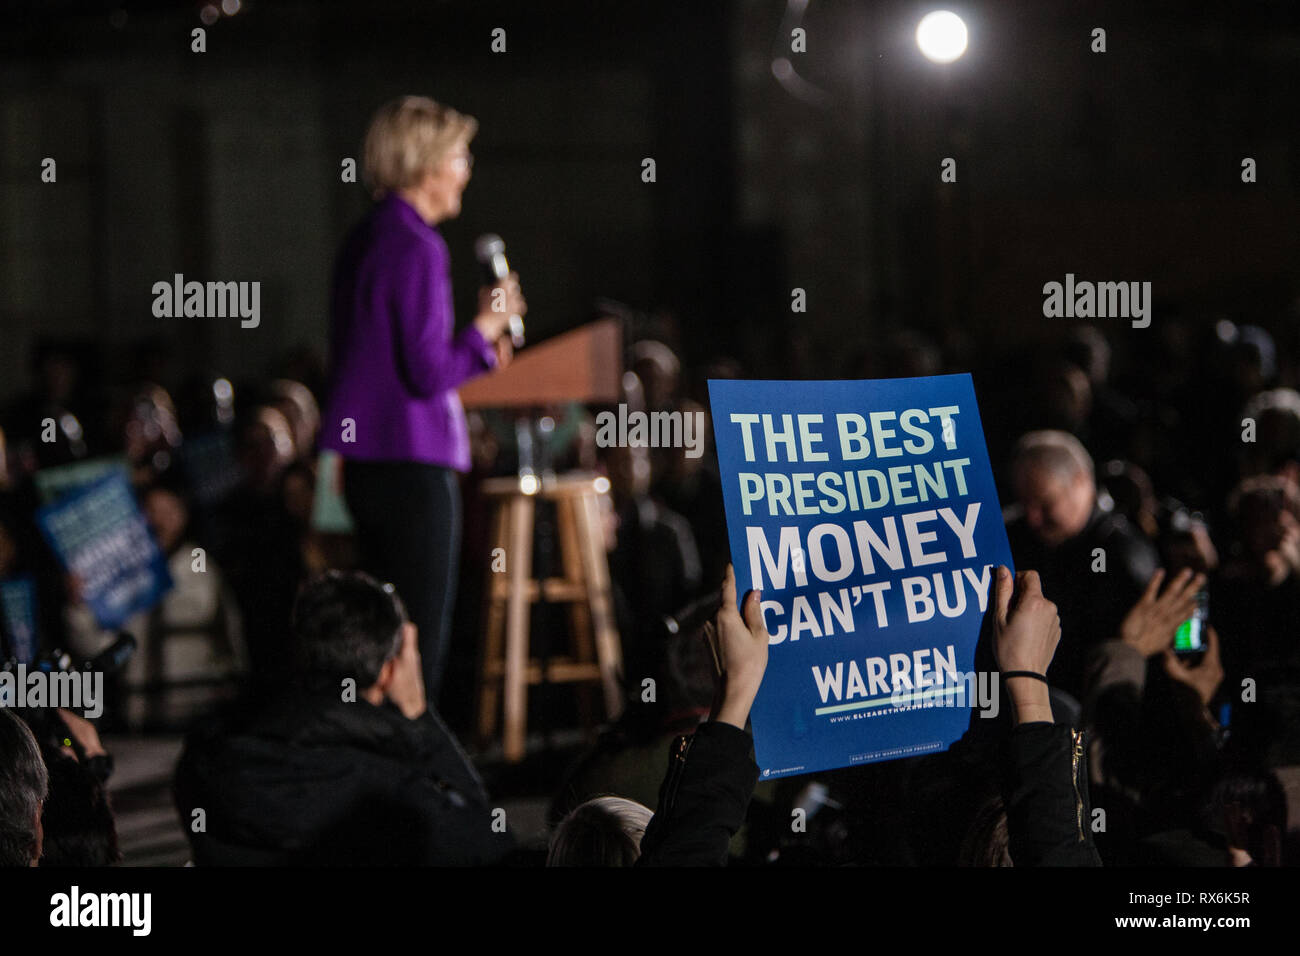 Long Island, New York, USa. 8th Mar 2019. Massachusetts Senator and Democratic Presidential candidate Elizabeth Warren drew an enthusiastic crowd at an organizing rally for her 2020 presidential campaign in Long Island City. Credit: Ed Lefkowicz/Alamy Live News Stock Photo